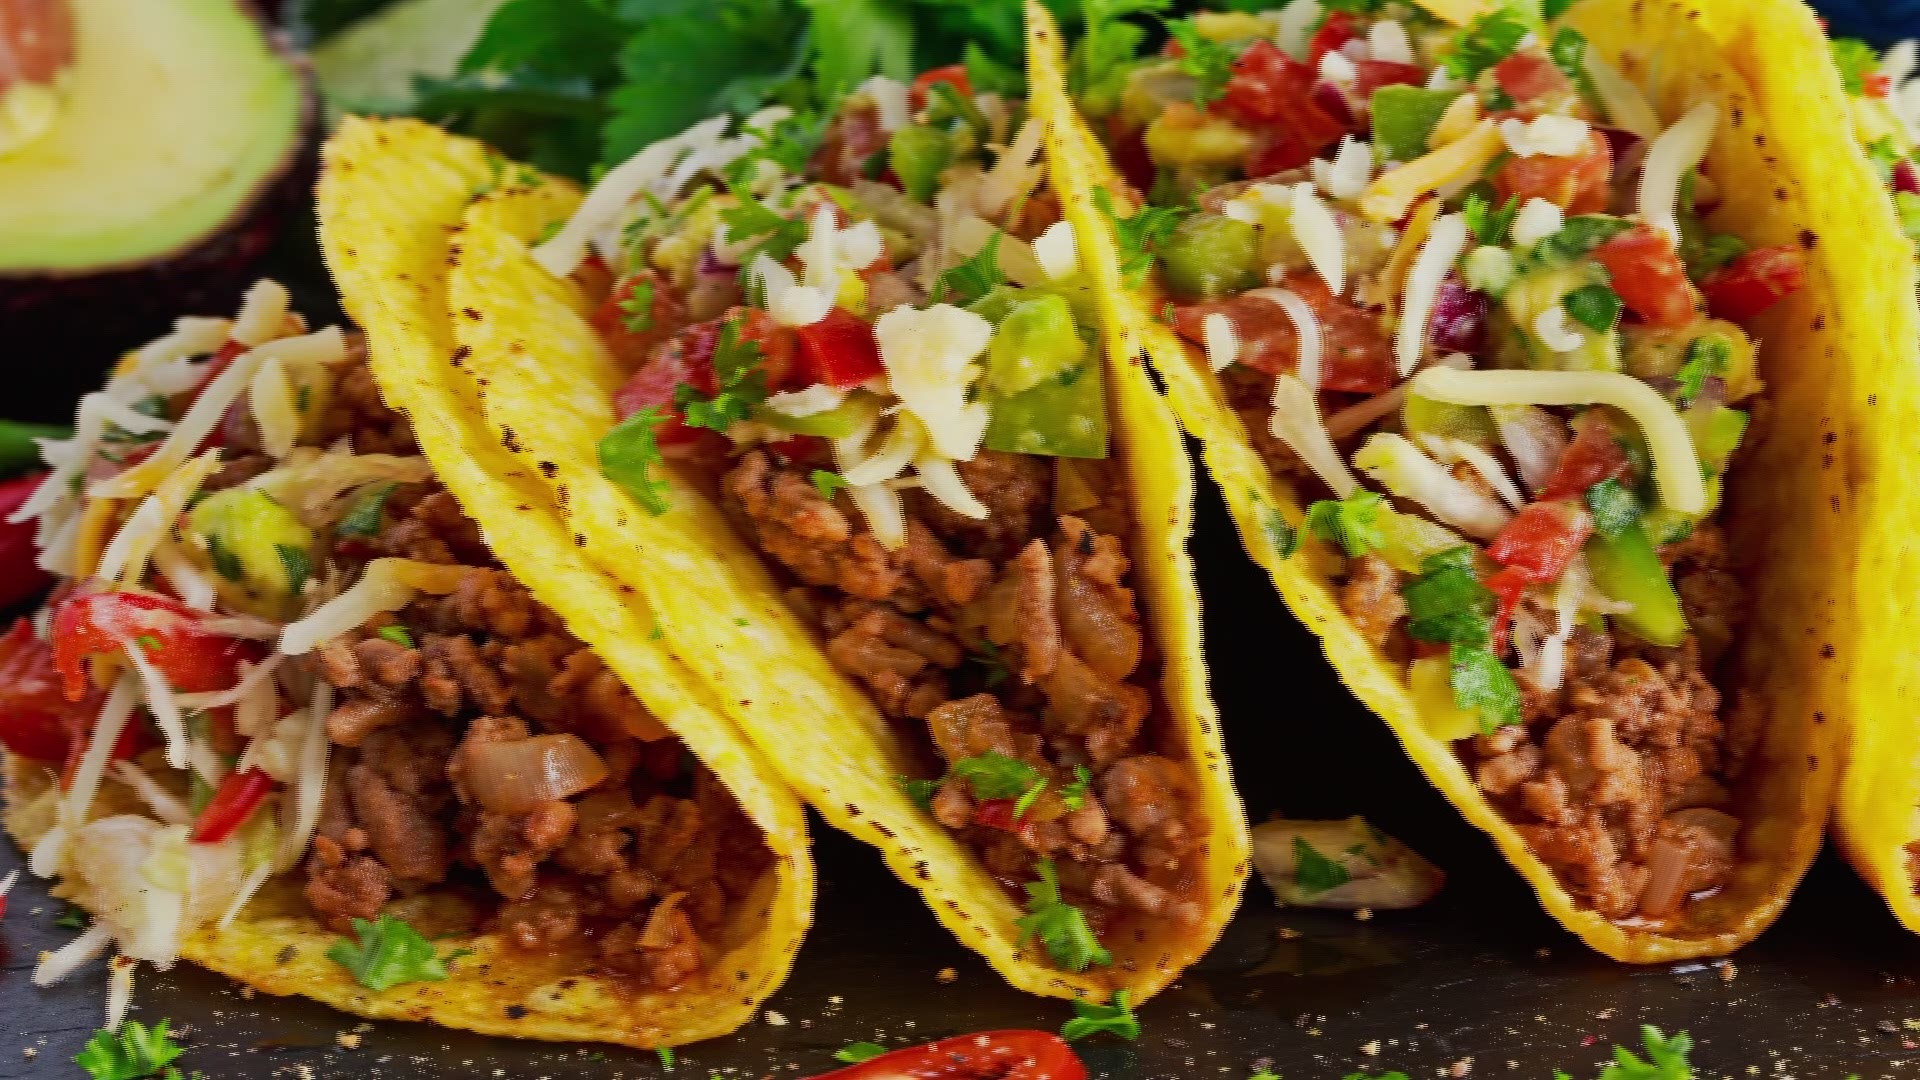 It’s not Taco Tuesday, but Friday is National Taco Day. Tacos are loved and eaten by millions each day.